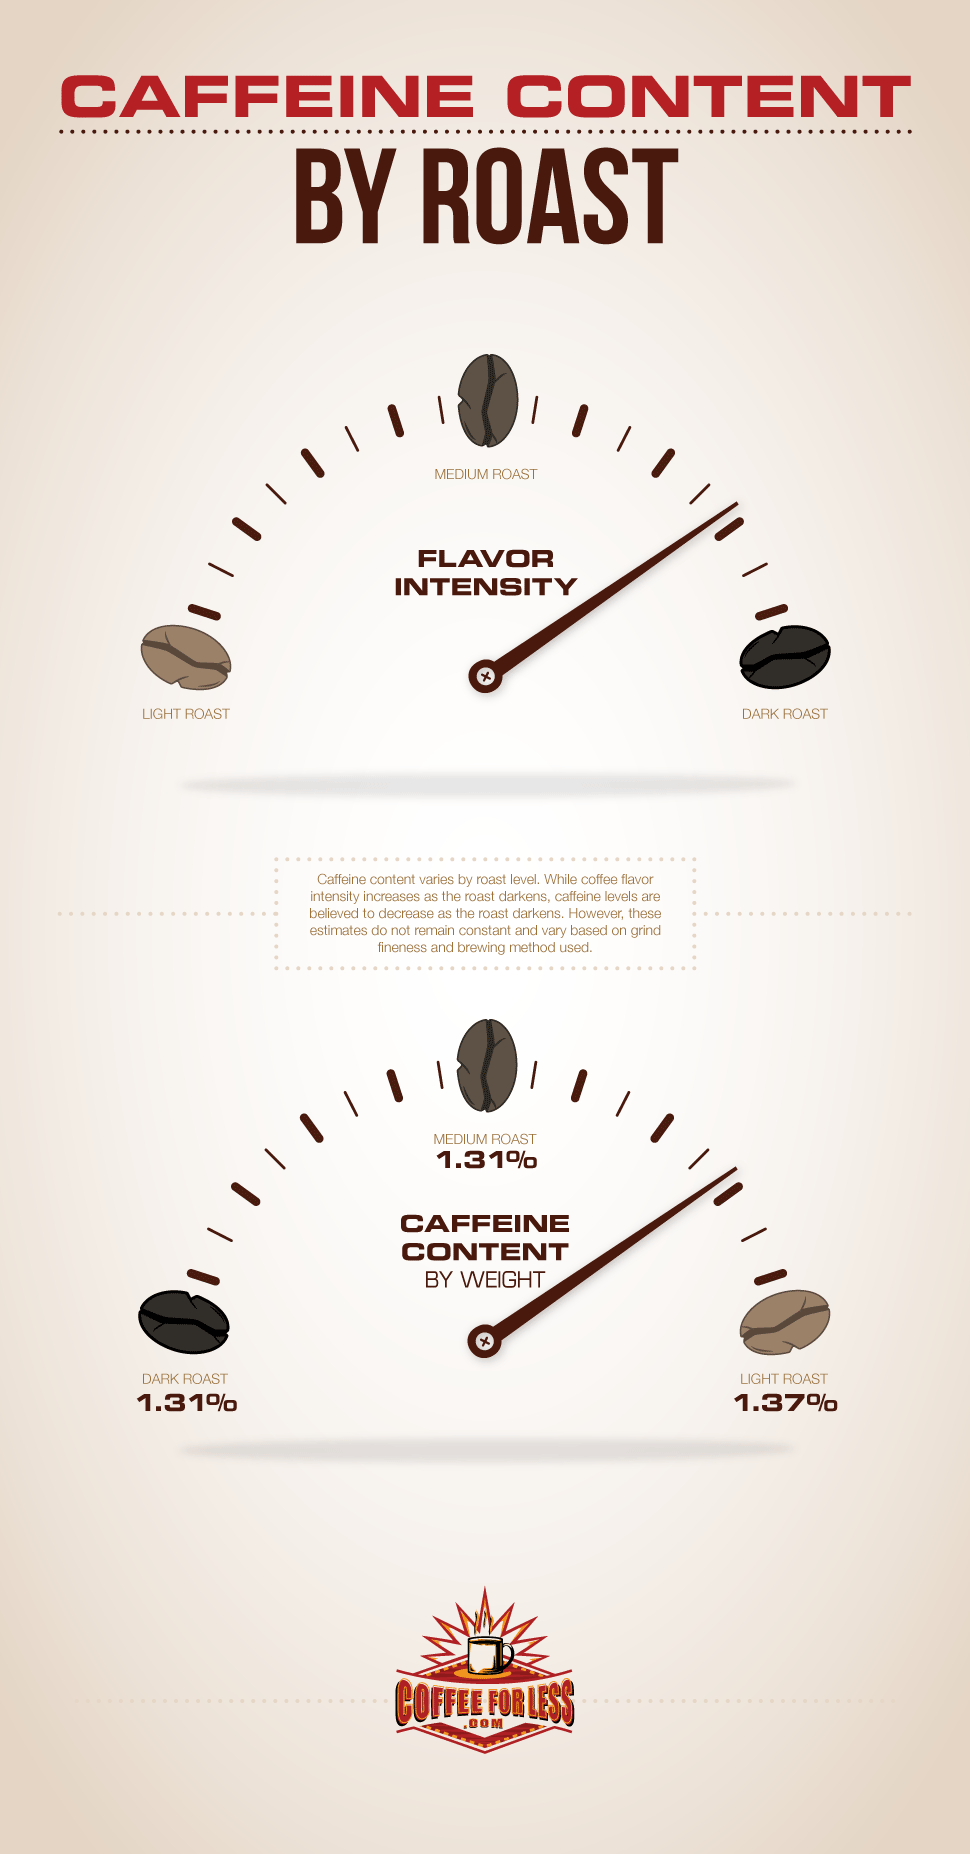 The amount of caffeine in your coffee varies based on how roasted the beans were. The grind and brewing method also play a part.